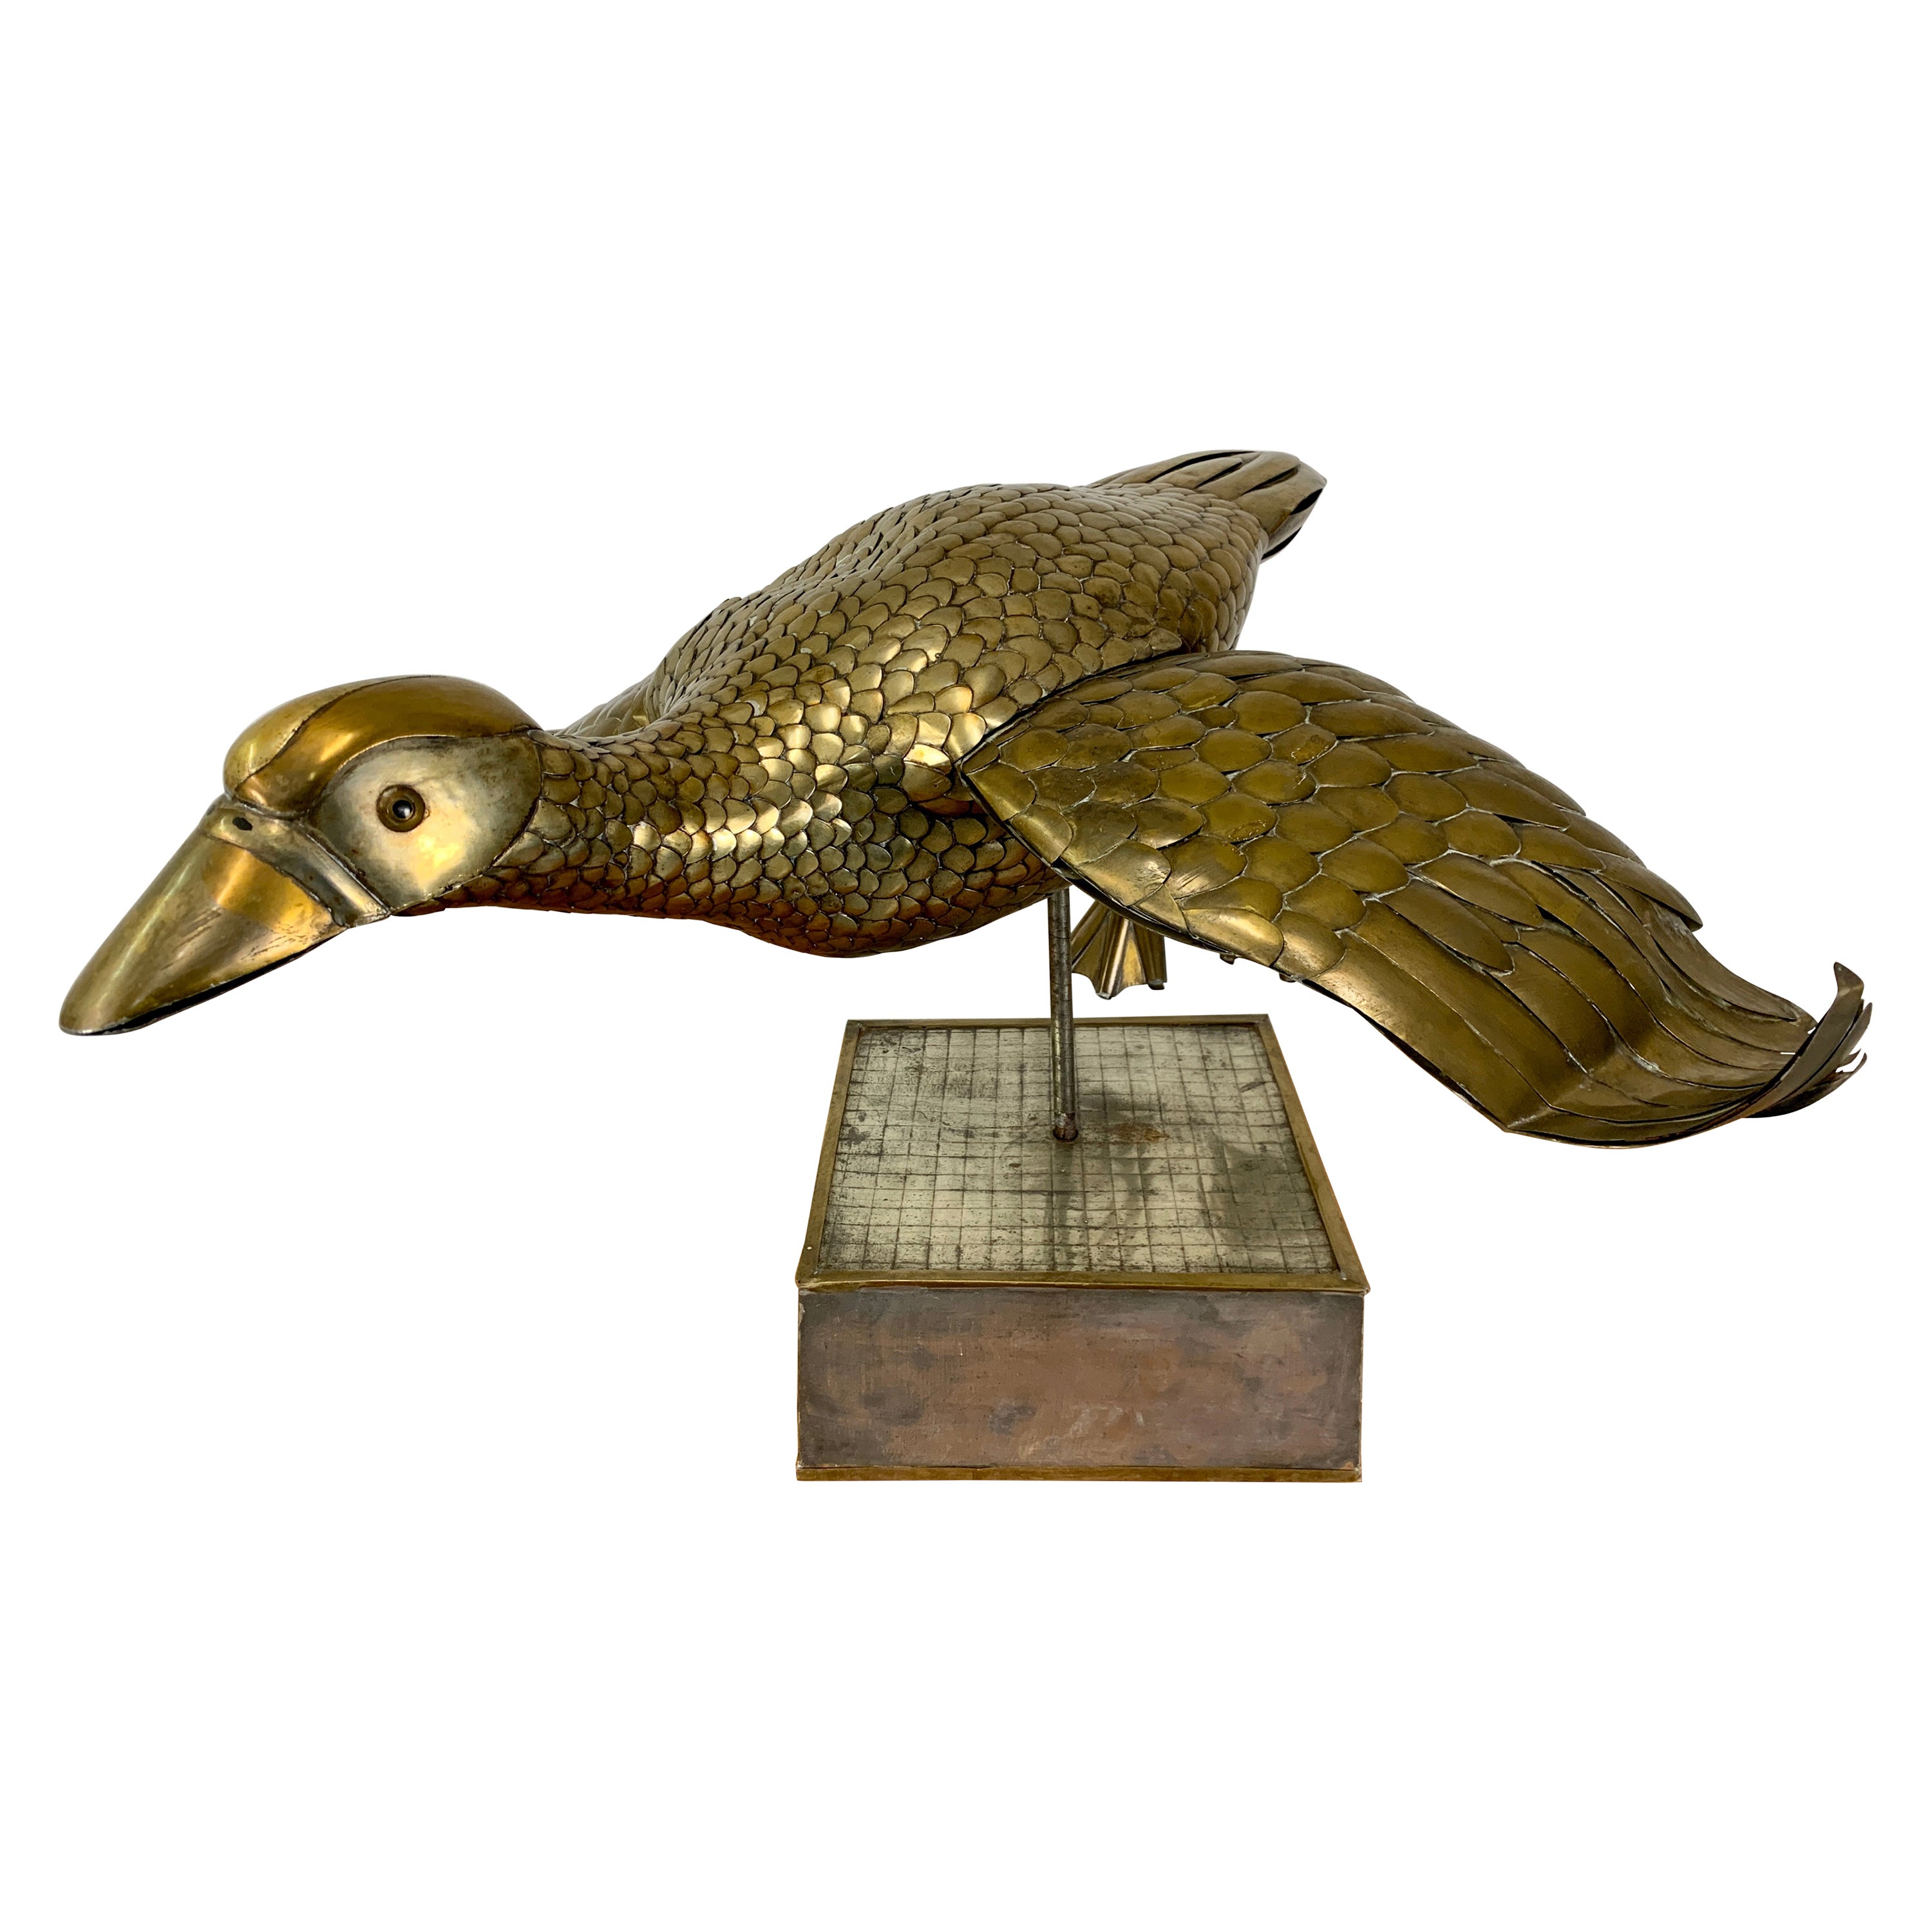 Limited Edition 2/100 Sergio Bustamante Flying Duck Sculpture